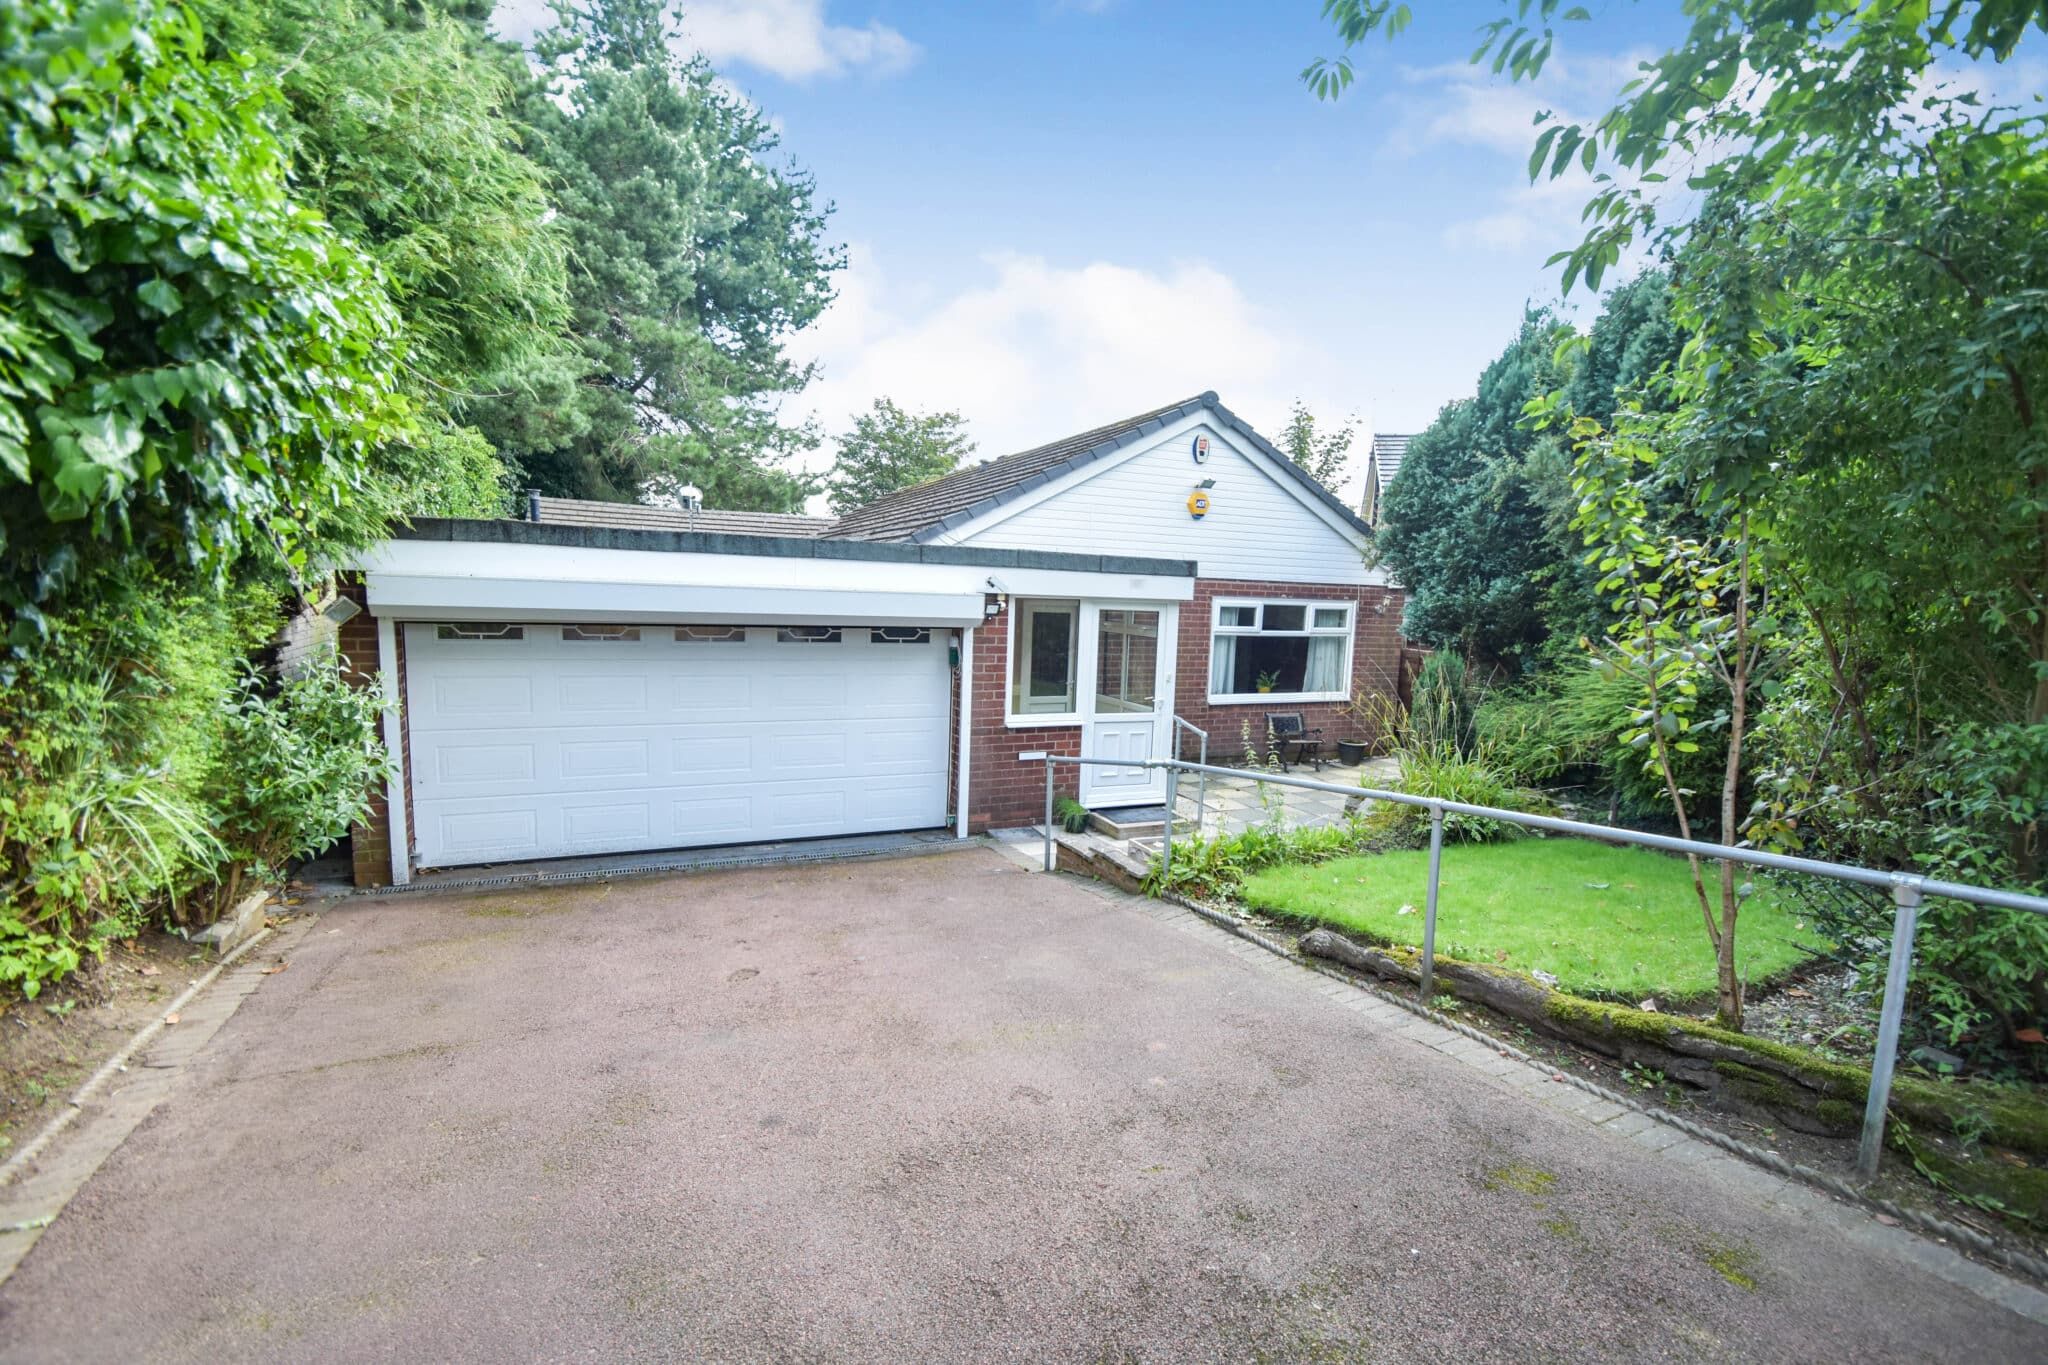 Eight Acre, Whitefield, Manchester, Manchester, M45 7LW